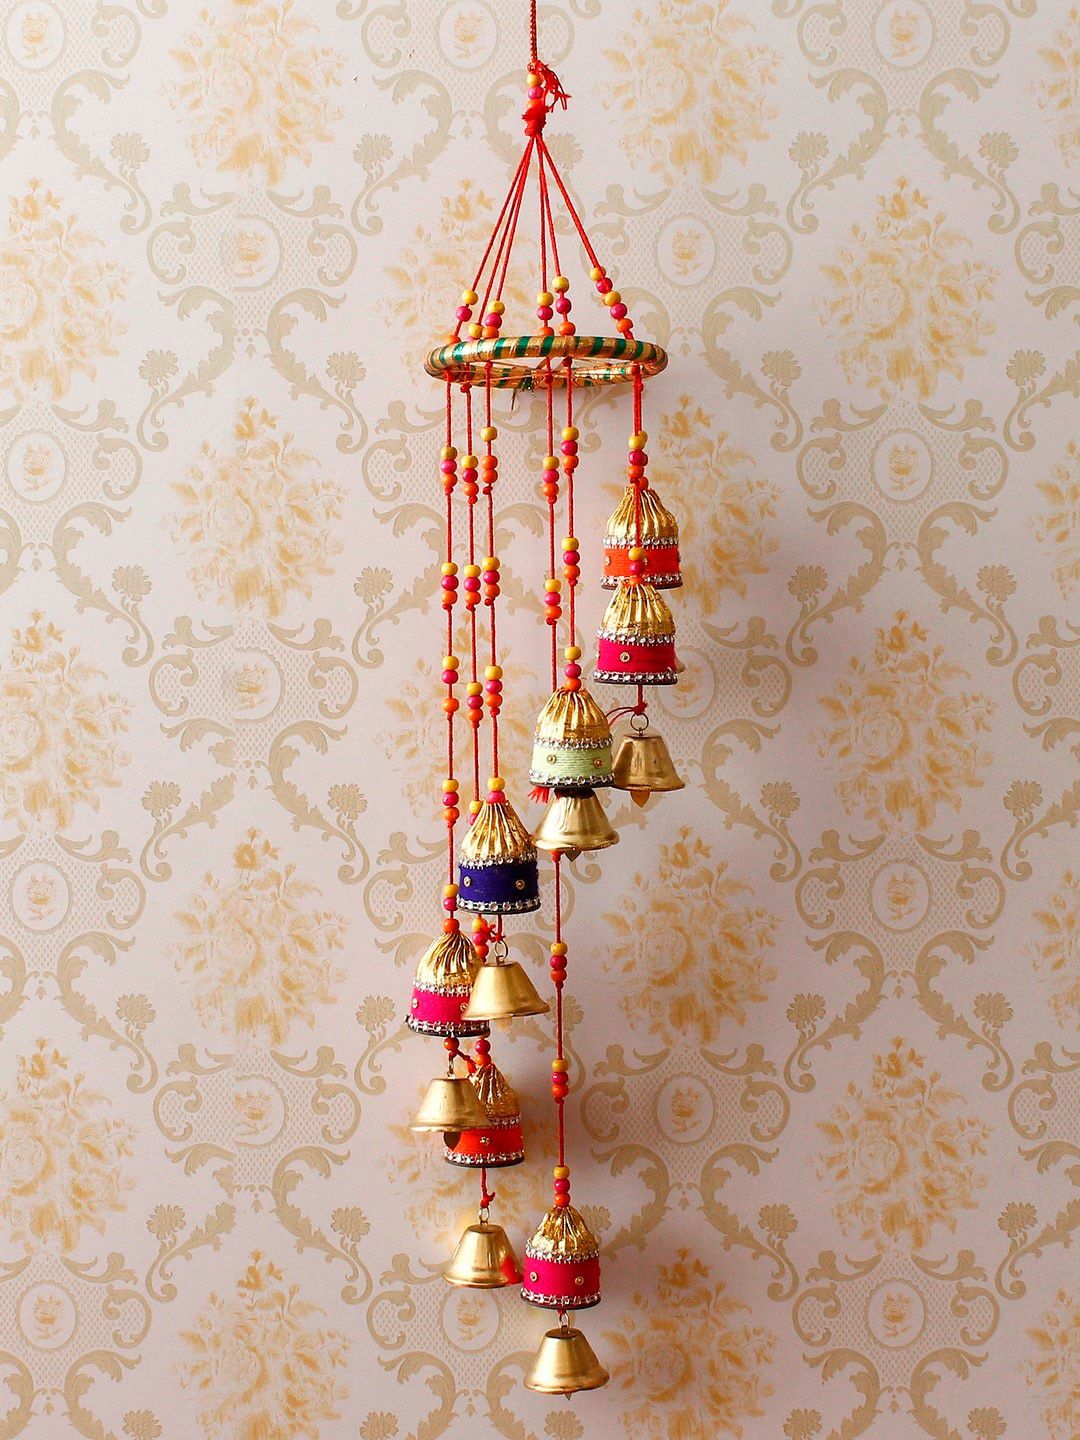 eCraftIndia Multicoloured Handcrafted Decorative Spiral Wall Hanging Bells Price in India